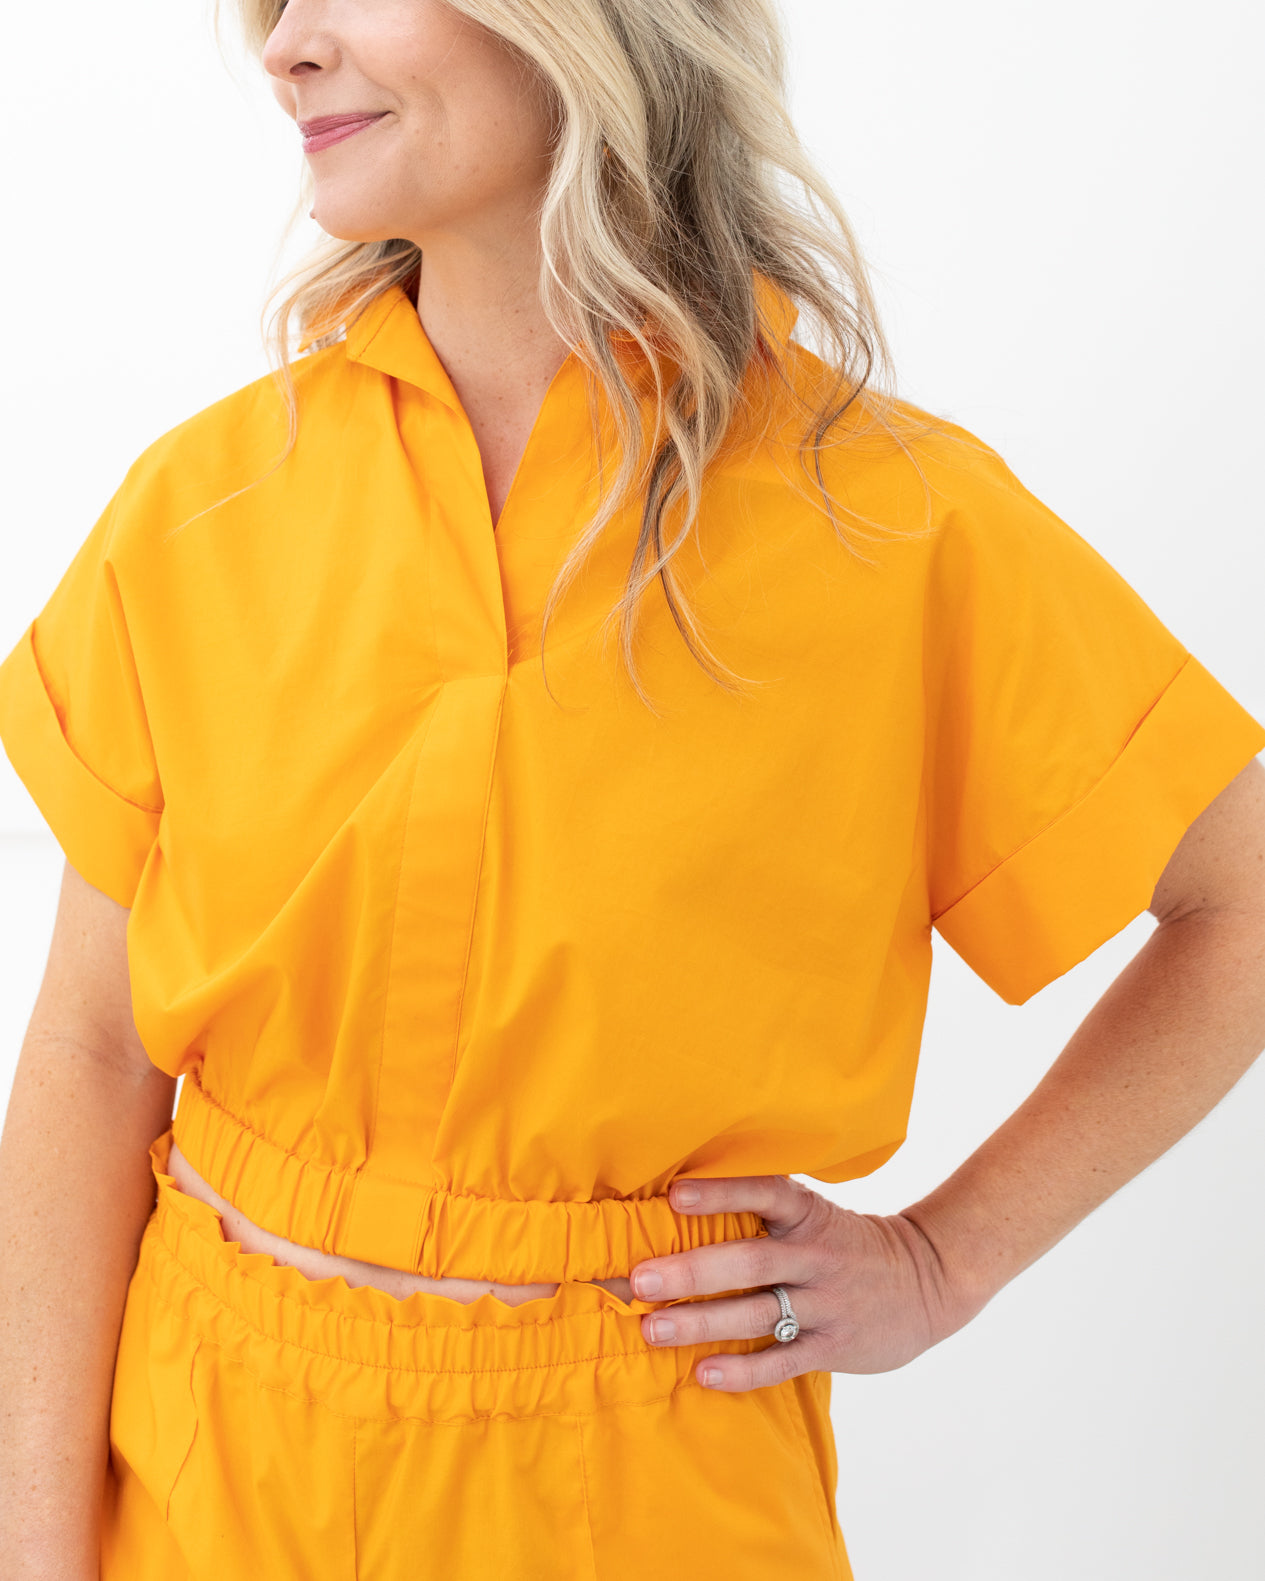 Tangerine Collared Top with Cinched Waist